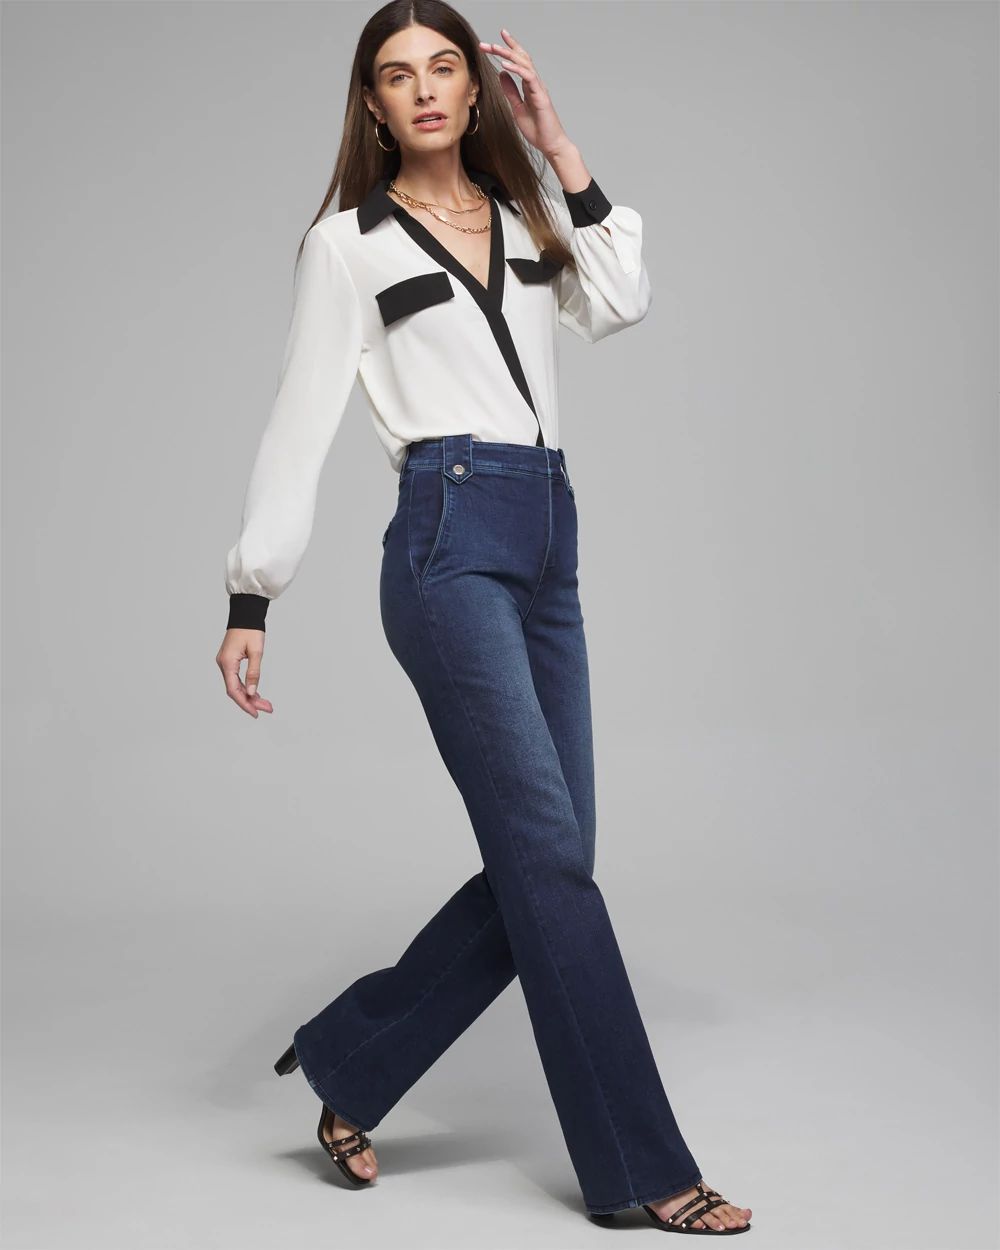 Outlet WHBM Long Sleeve Collar Soft Shirt click to view larger image.